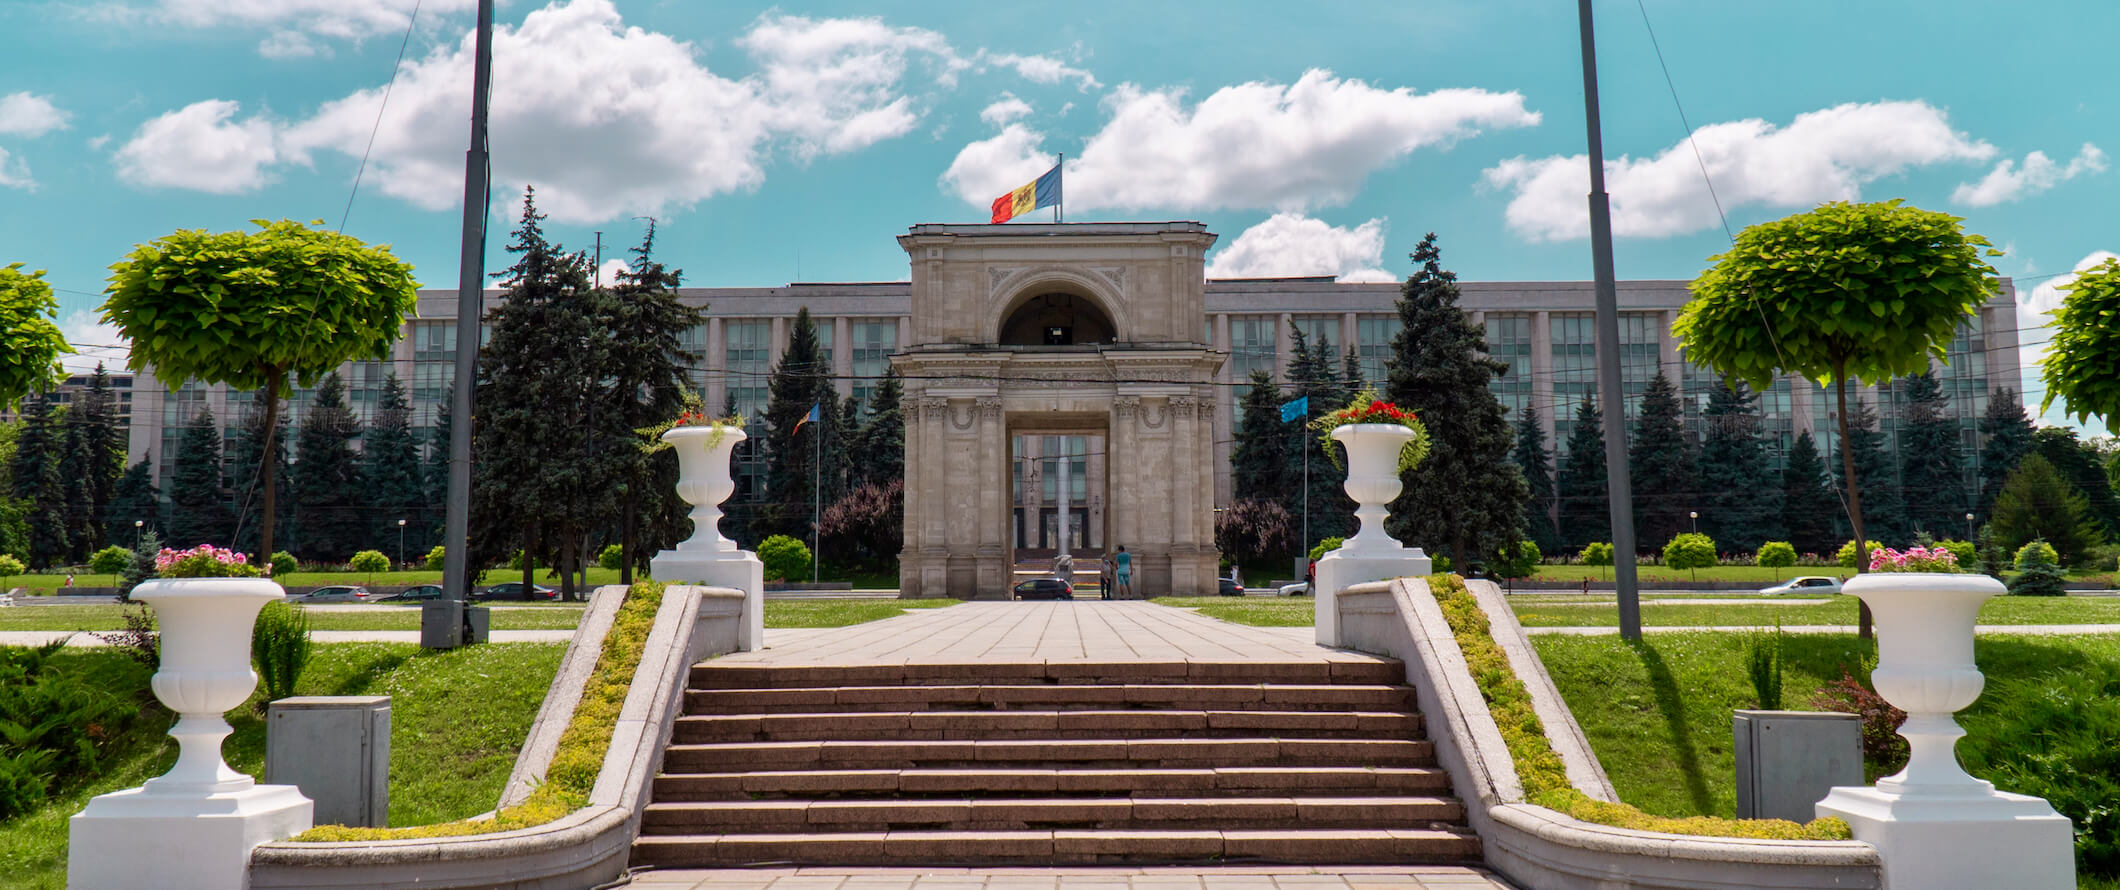 A historic building in the capital city of Chisinau on a bright summer day with the flag waving